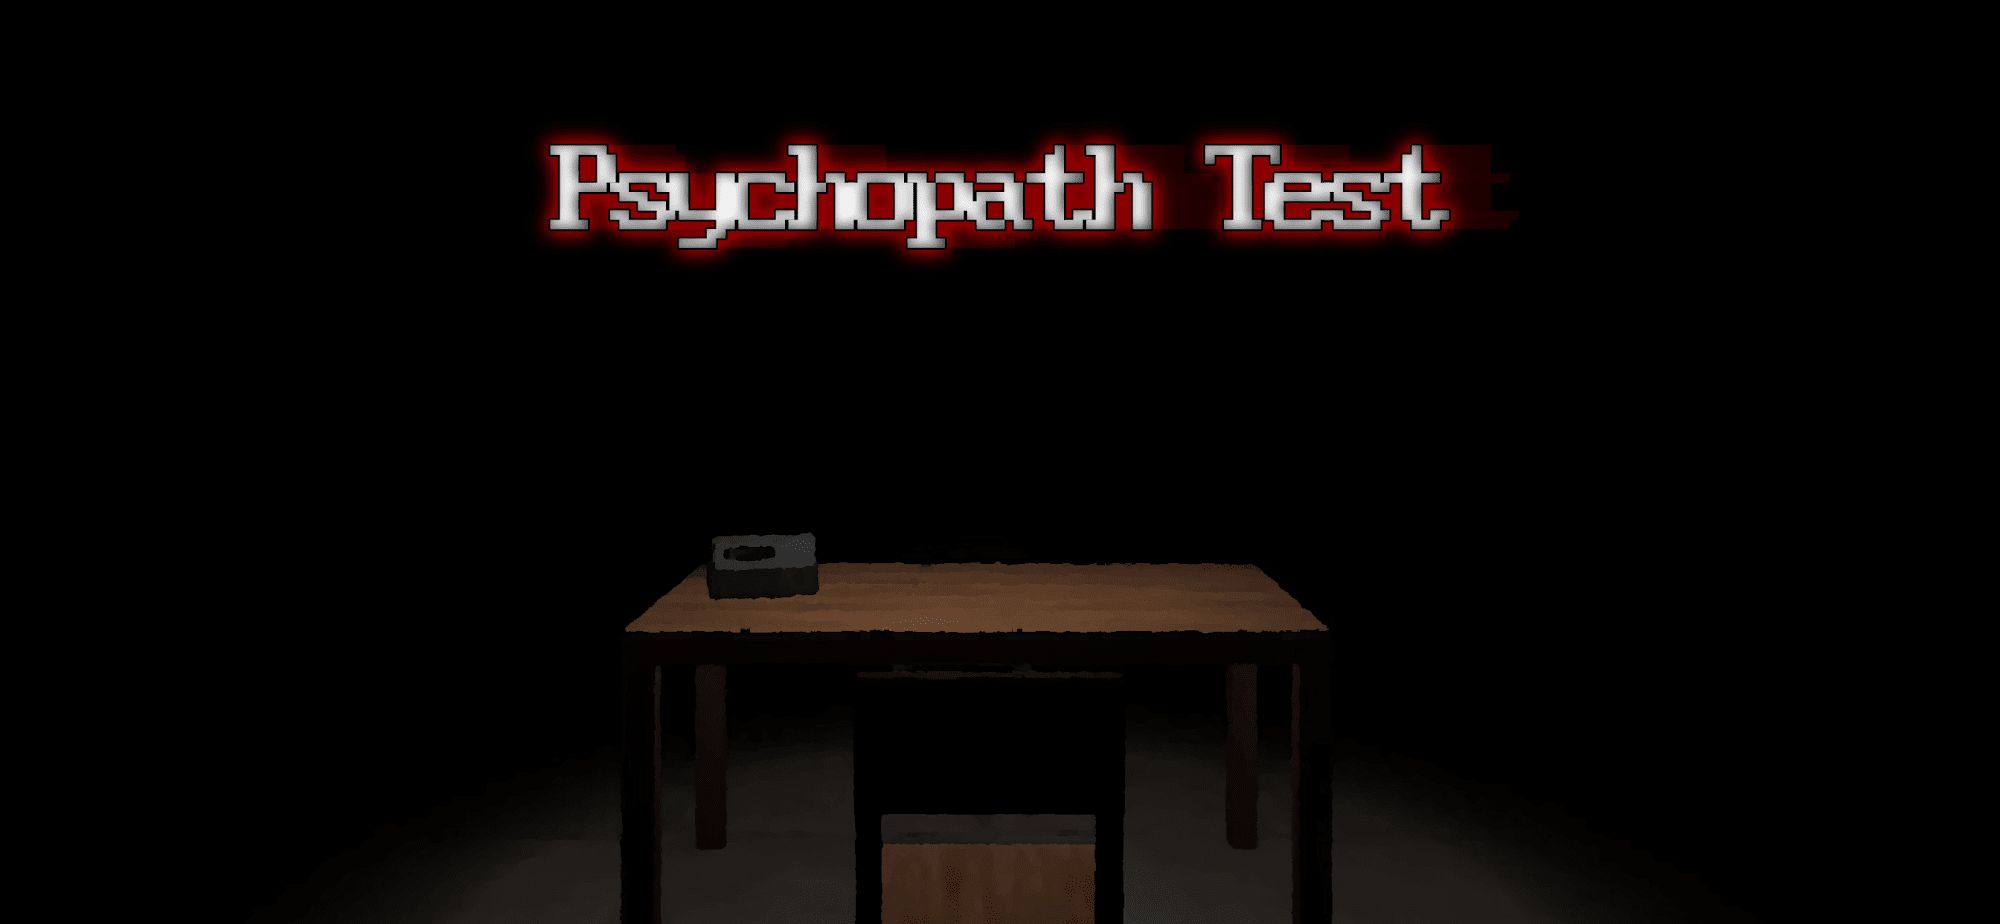 Scarica Psychopath Test gratis per Android.